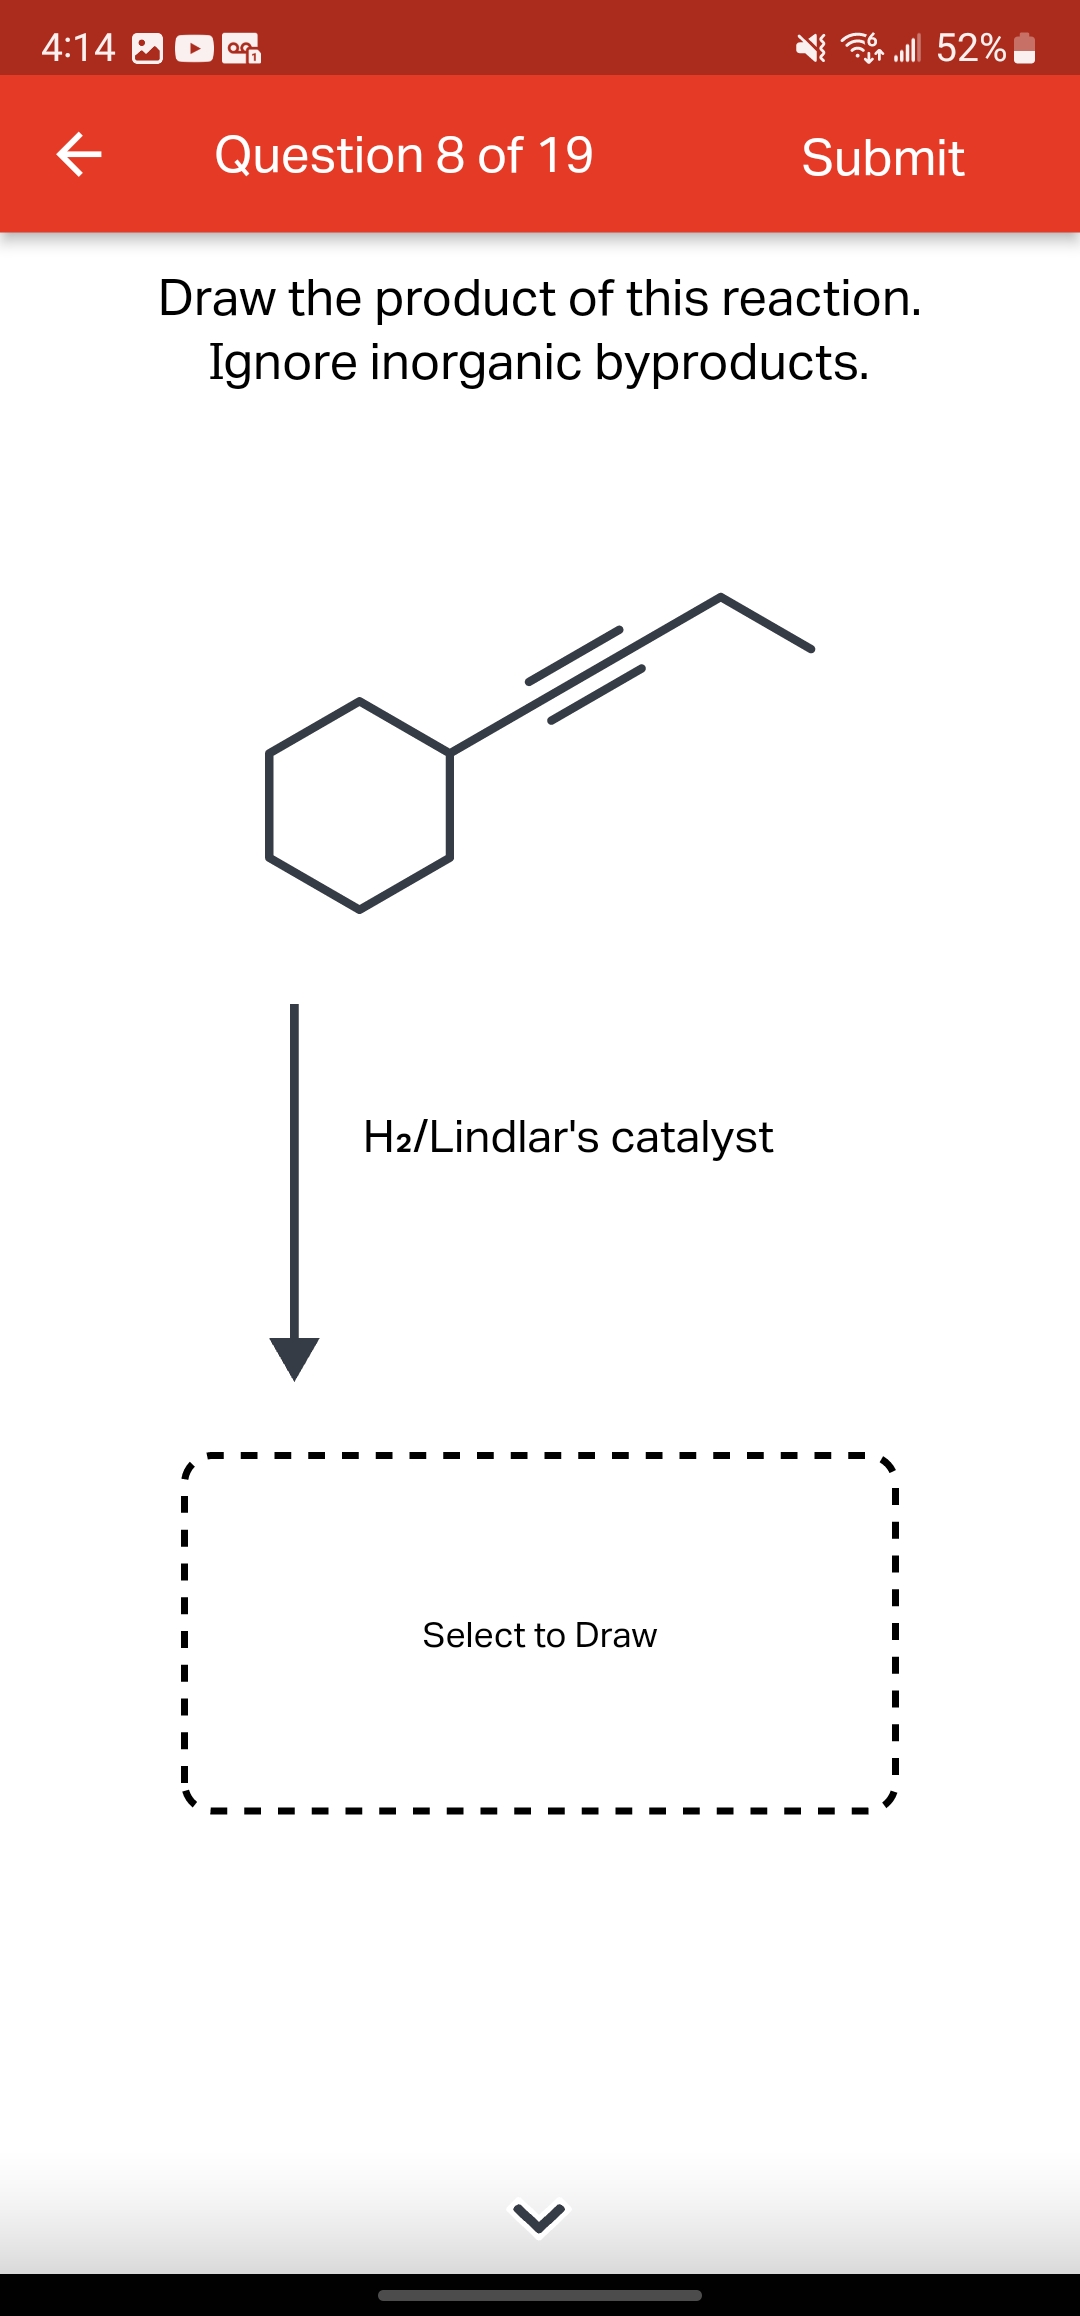 4:14
←
OG
Question 8 of 19
H₂/Lindlar's catalyst
Draw the product of this reaction.
Ignore inorganic byproducts.
Select to Draw
lll 52%
>
Submit